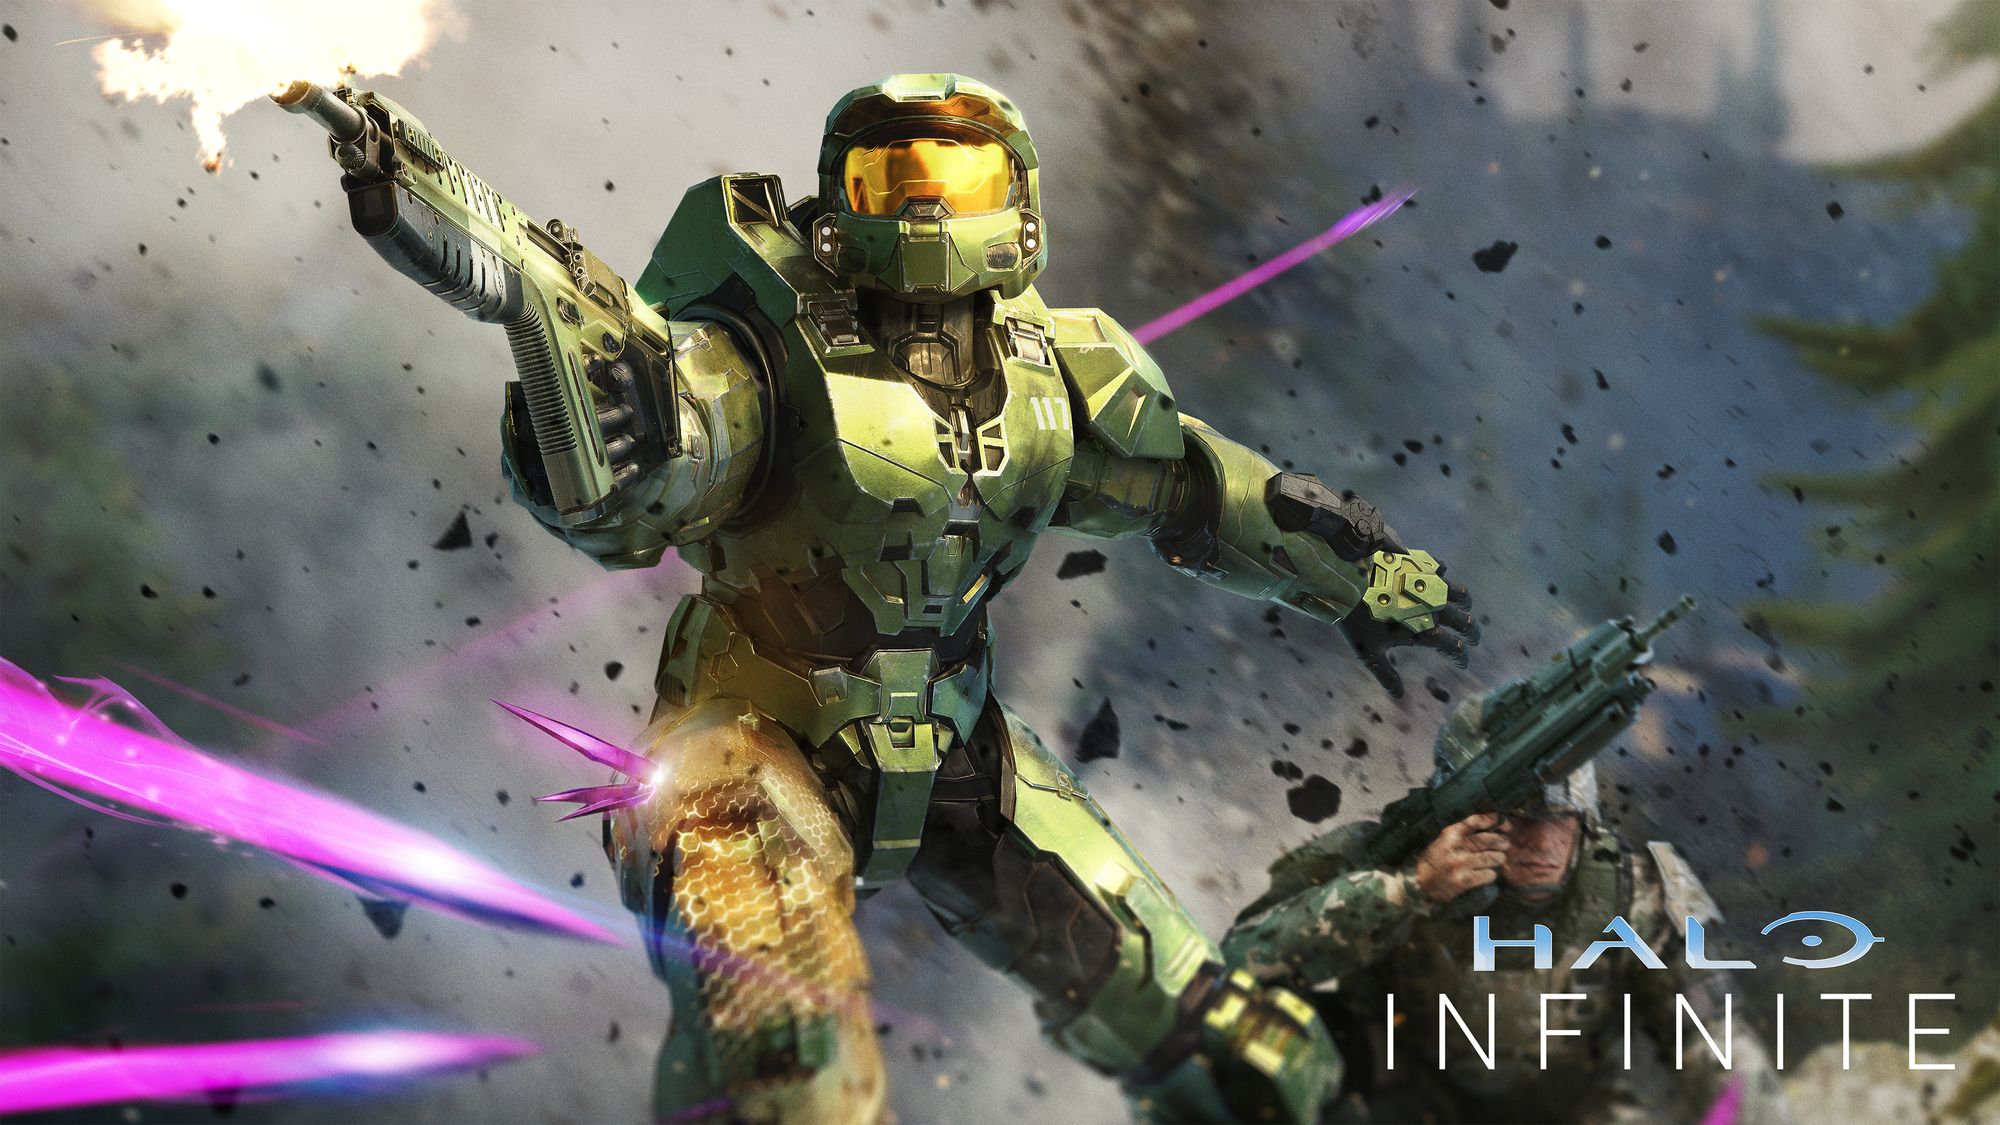 Halo Infinite Season 2 Lone Wolves: Release date and everything we know